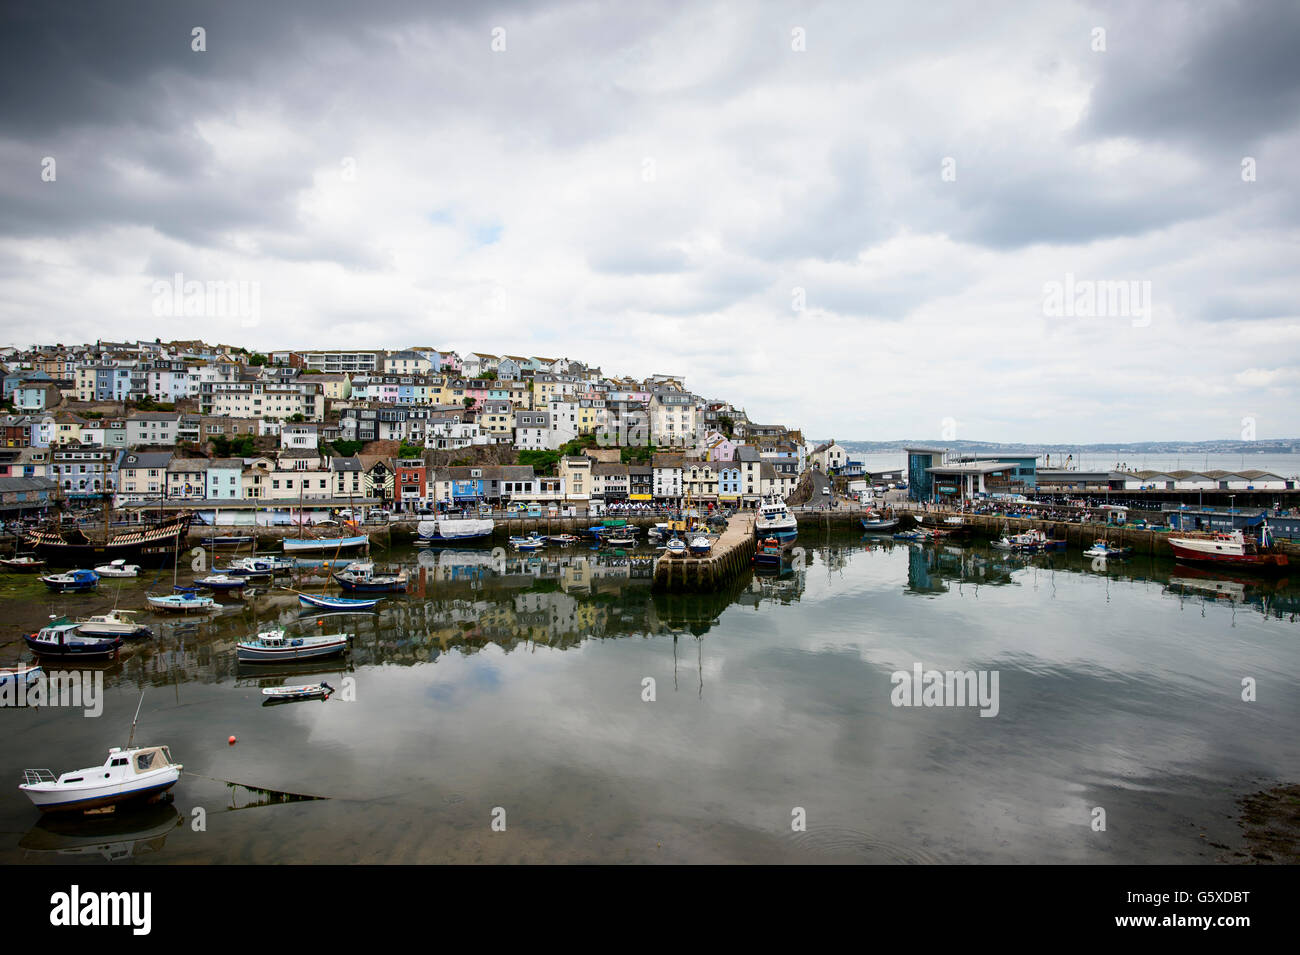 Brixham is a small fishing town and civil parish in the district of Torbay in the county of Devon, in the south-west of England. Stock Photo